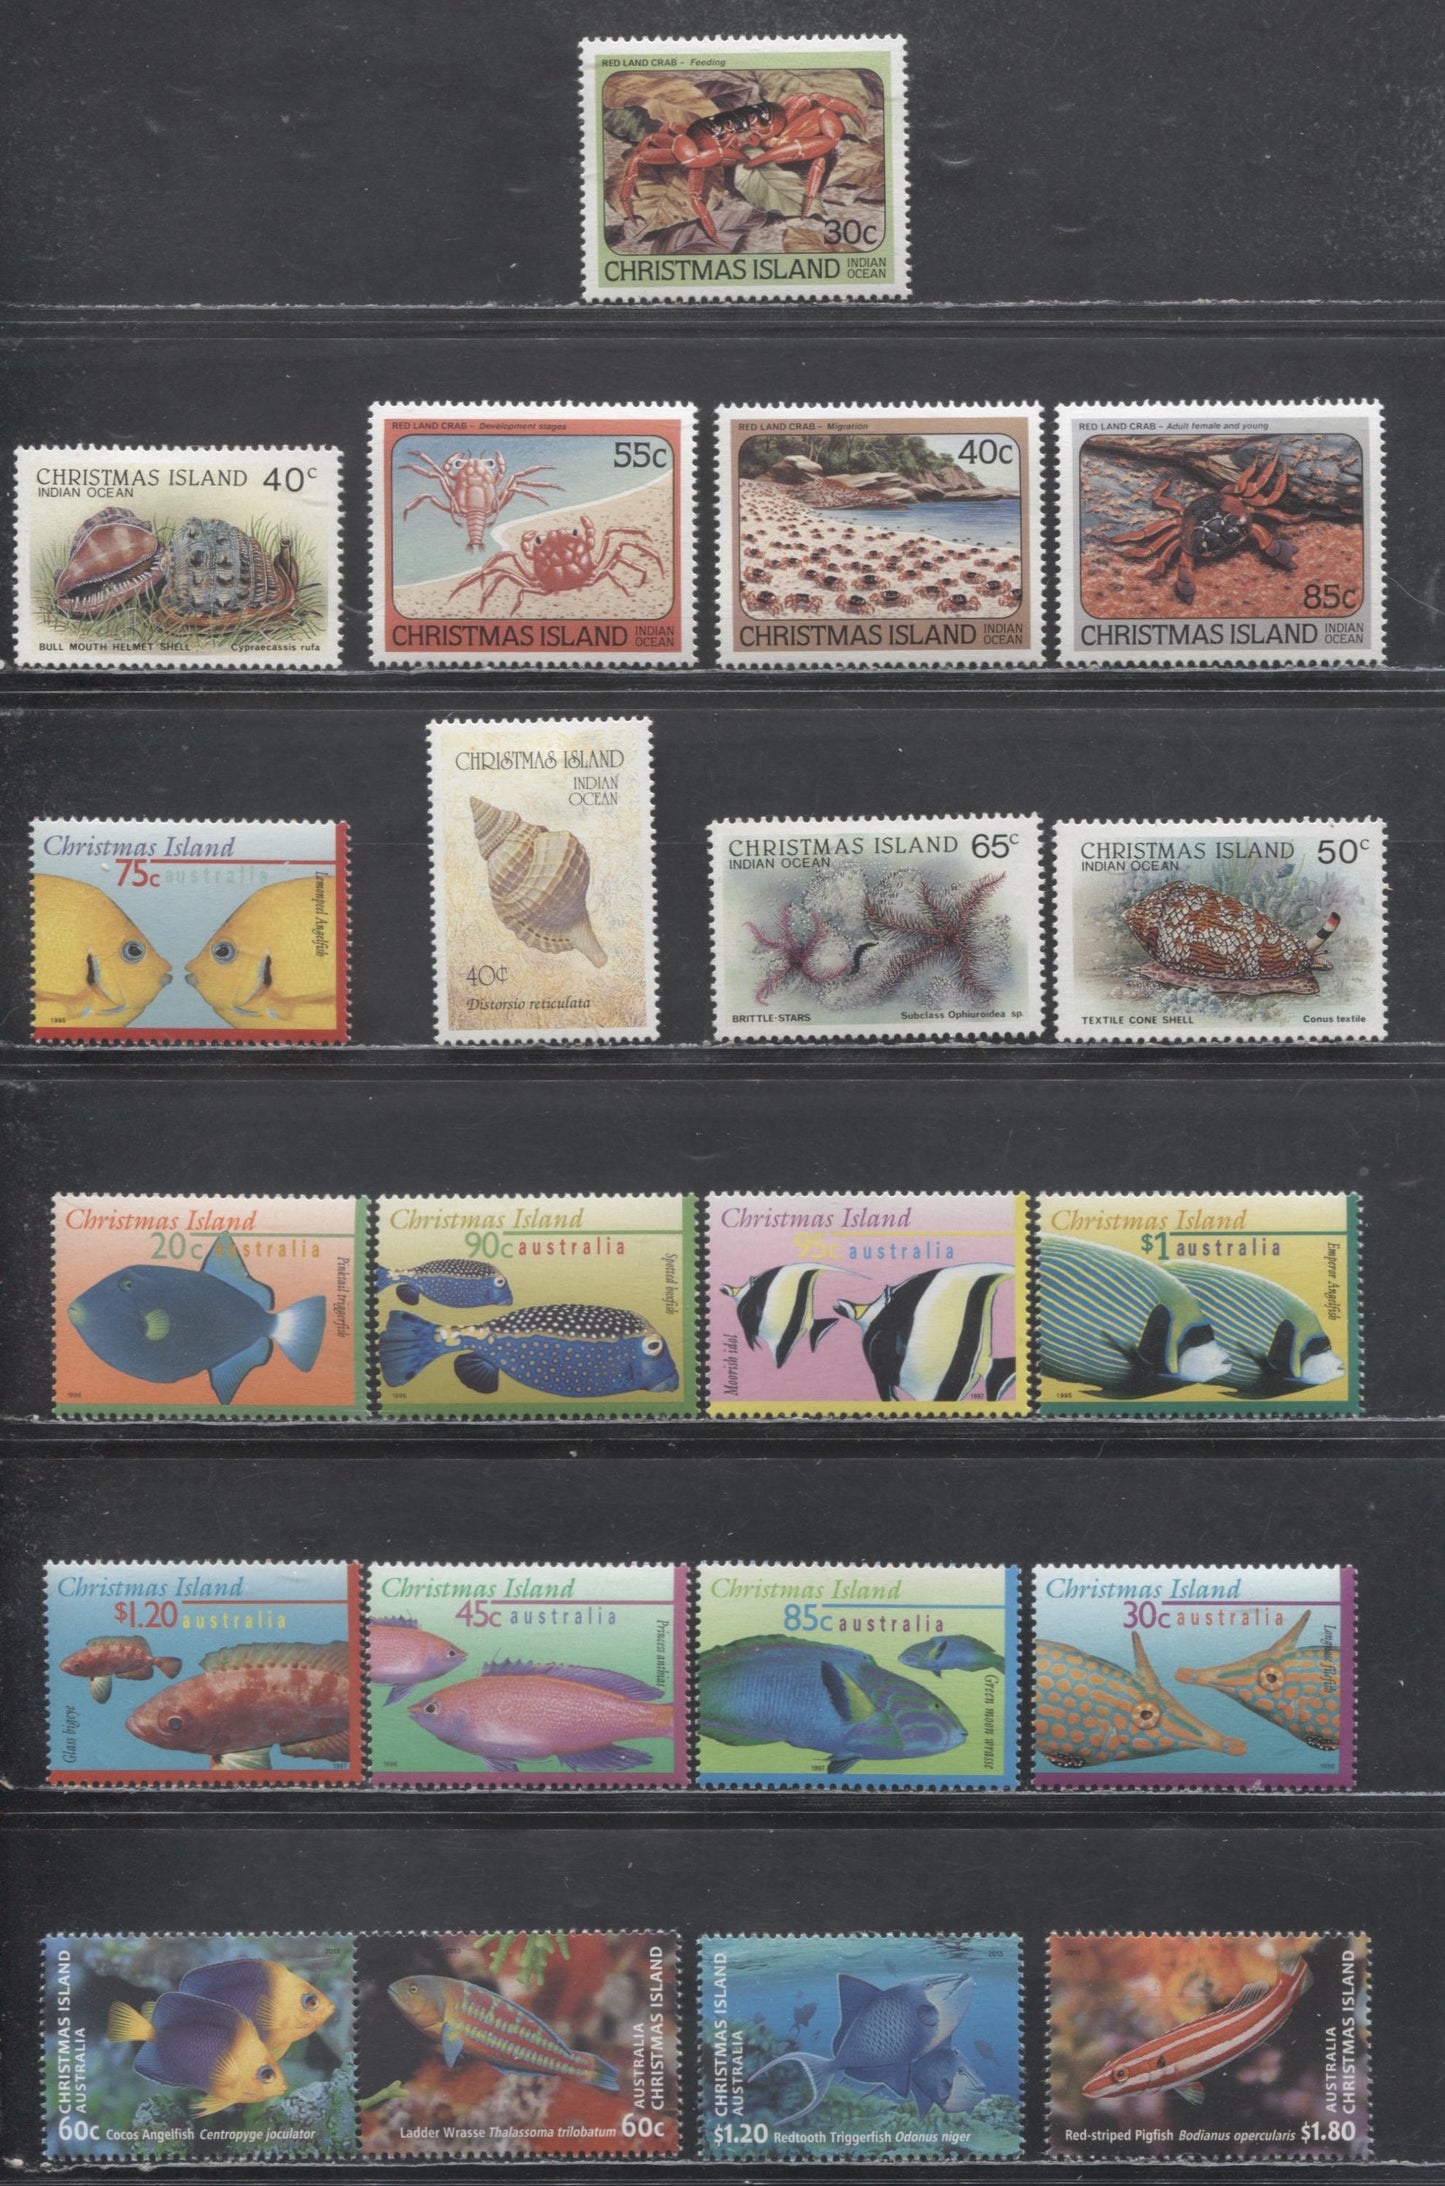 Lot 162 Christmas Island SC#148/515 1984-2013 Crabs - Fish Definitives, 21 VFOG & NH Singles, Click on Listing to See ALL Pictures, Estimated Value $28